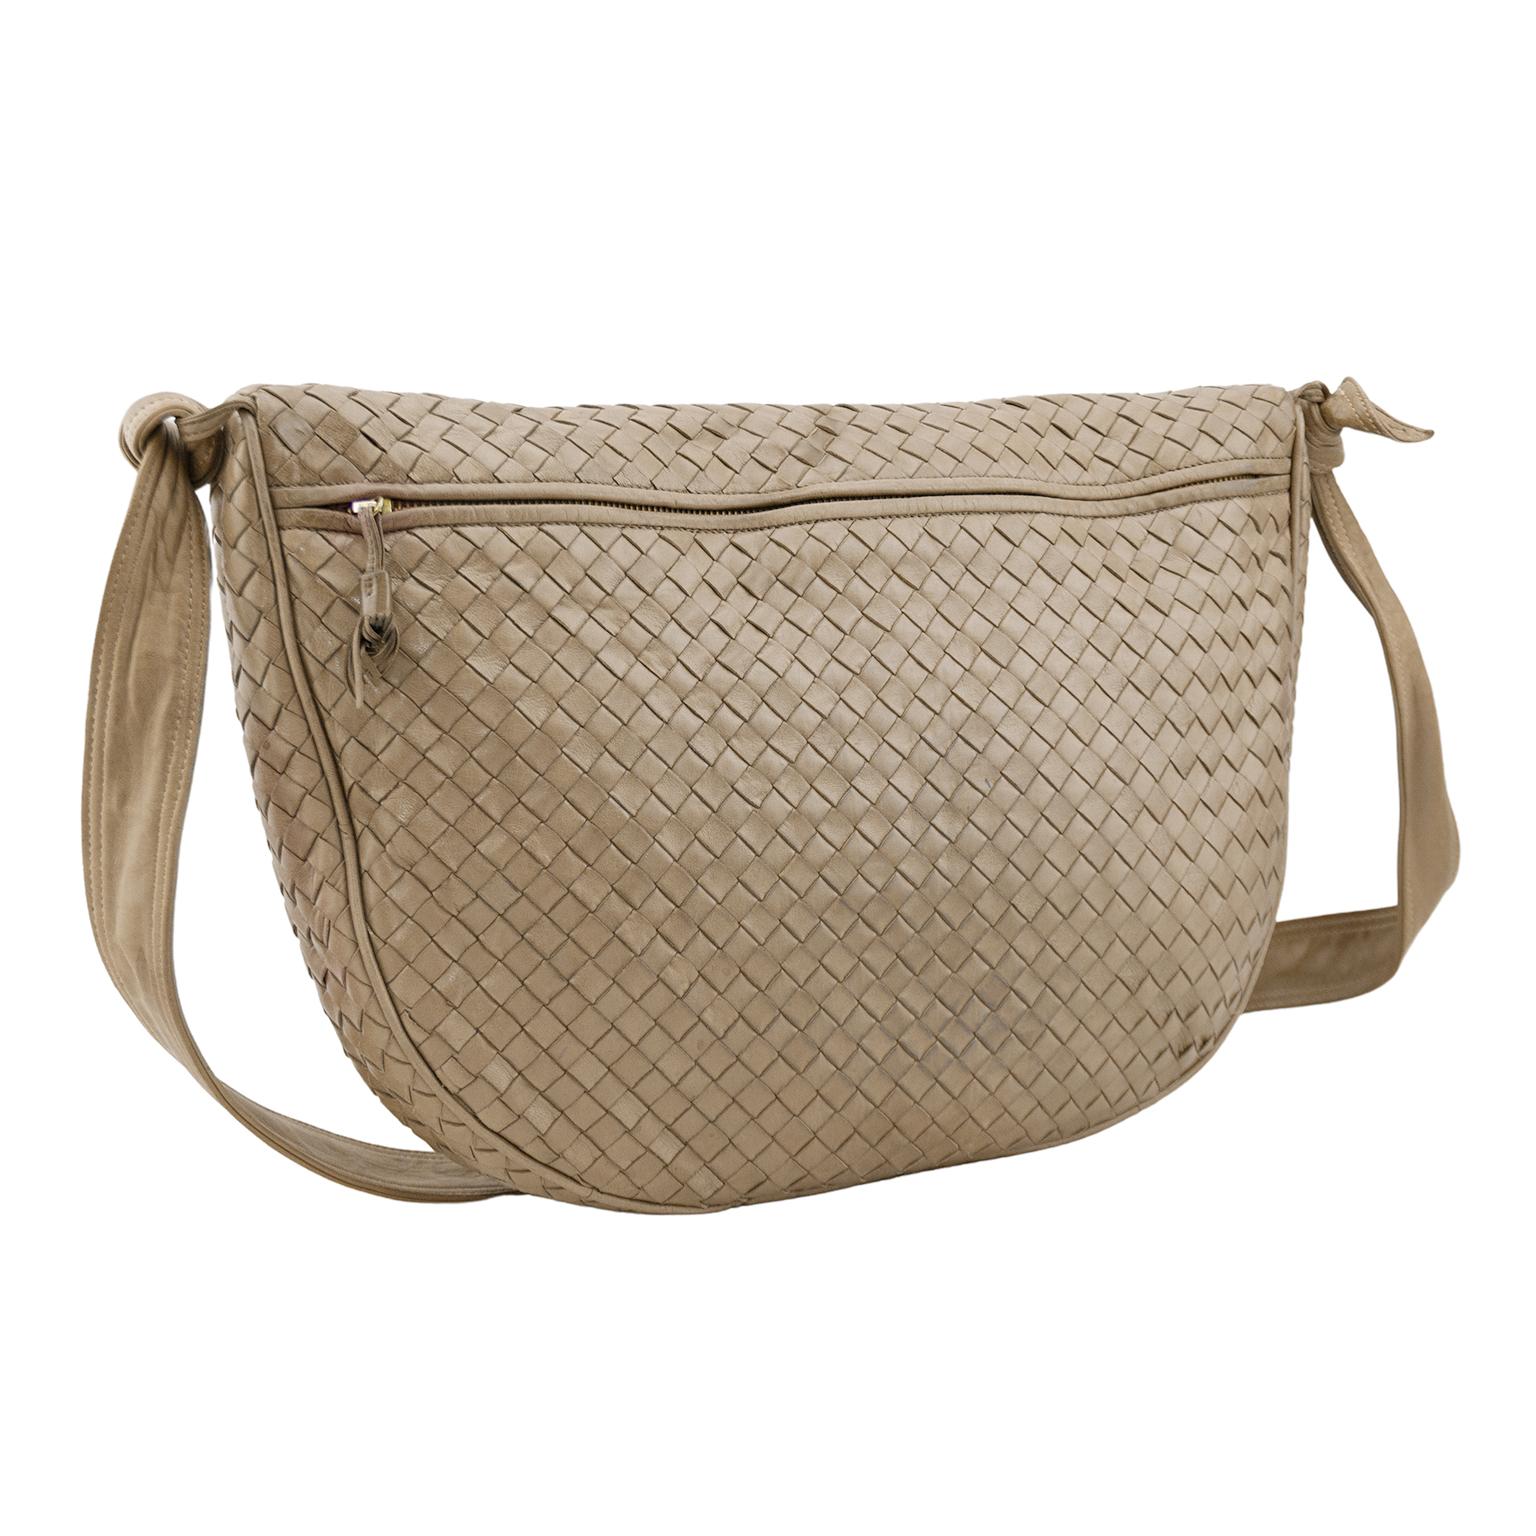 Beautiful 1990s Bottega Veneta hobo bag. Taupe intrecciato leather with matching taupe leather crossbody strap. Strap features monochromatic top stitching and knot details. Large slit pocket with zipper on front and small slit pocket with zipper on